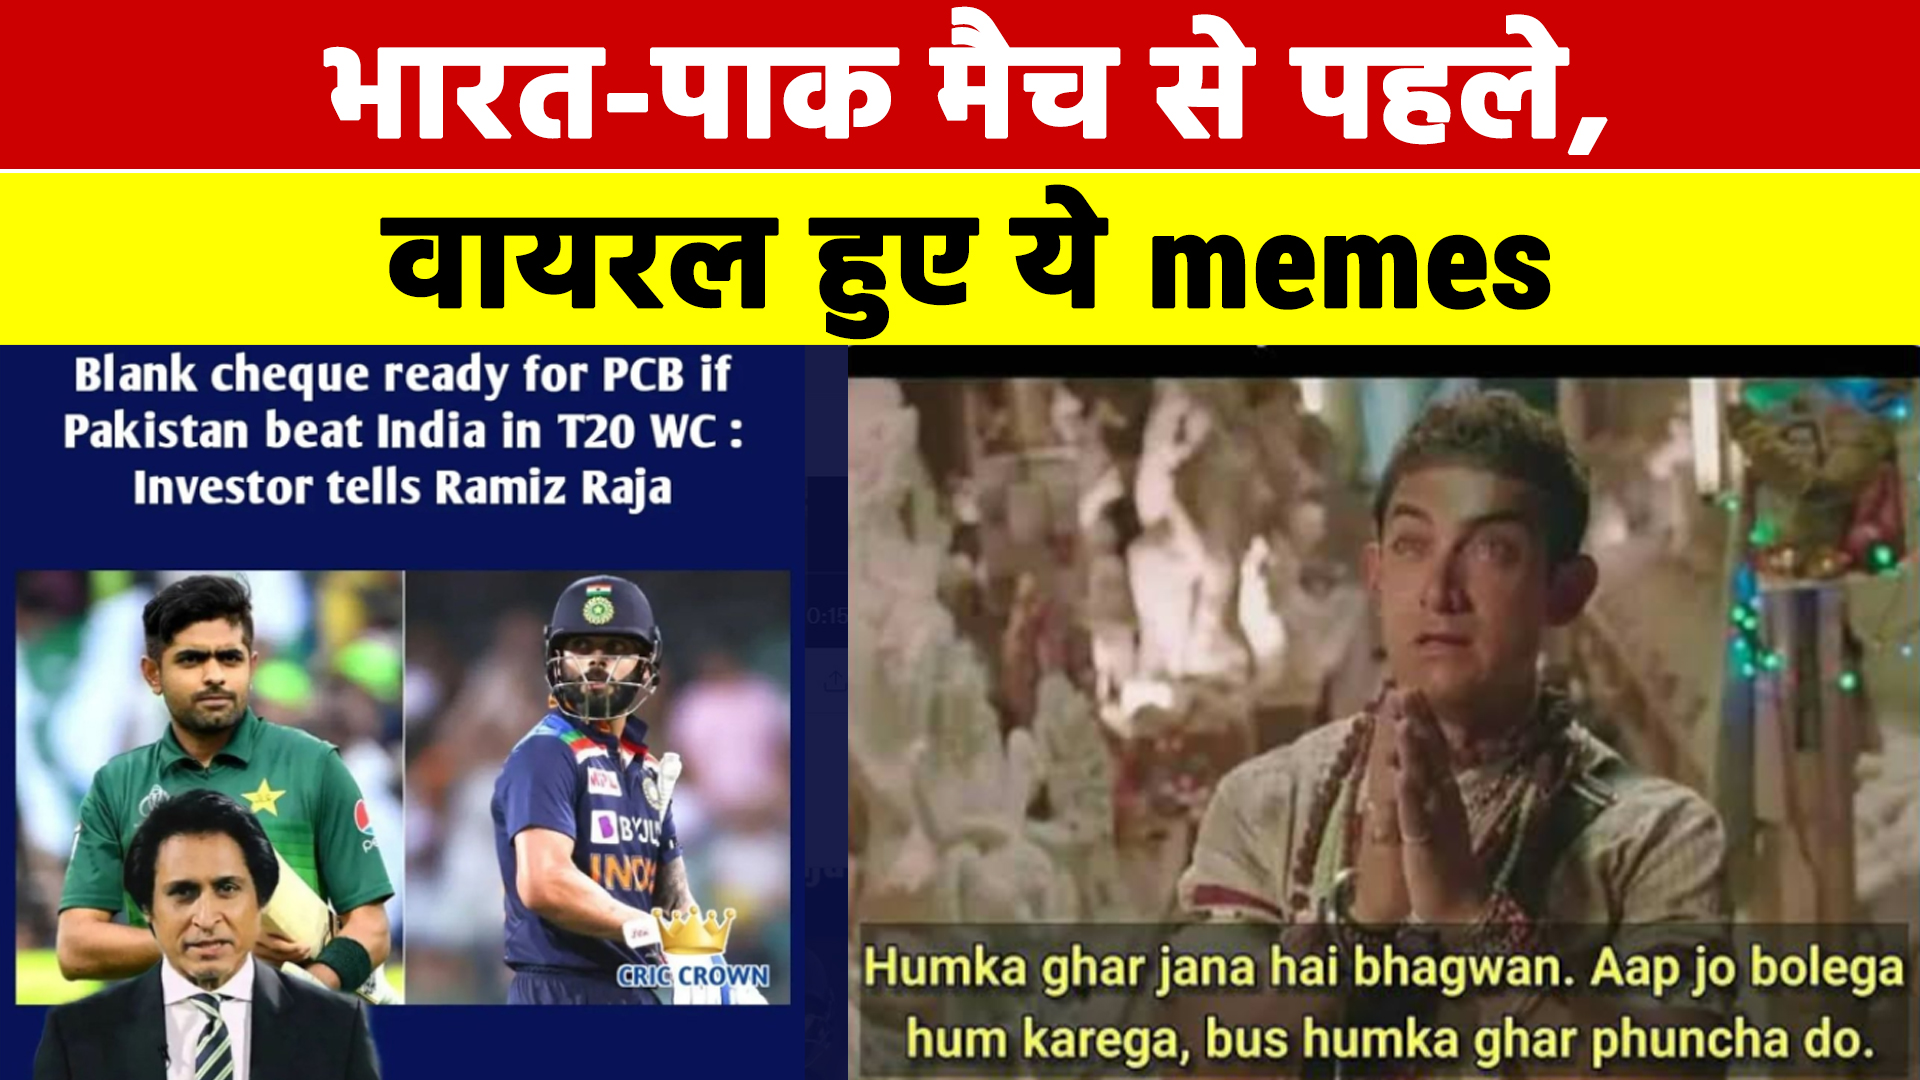 India vs Pak will clash in T20 World Cup on October 24, memes get vira -  News Nation English